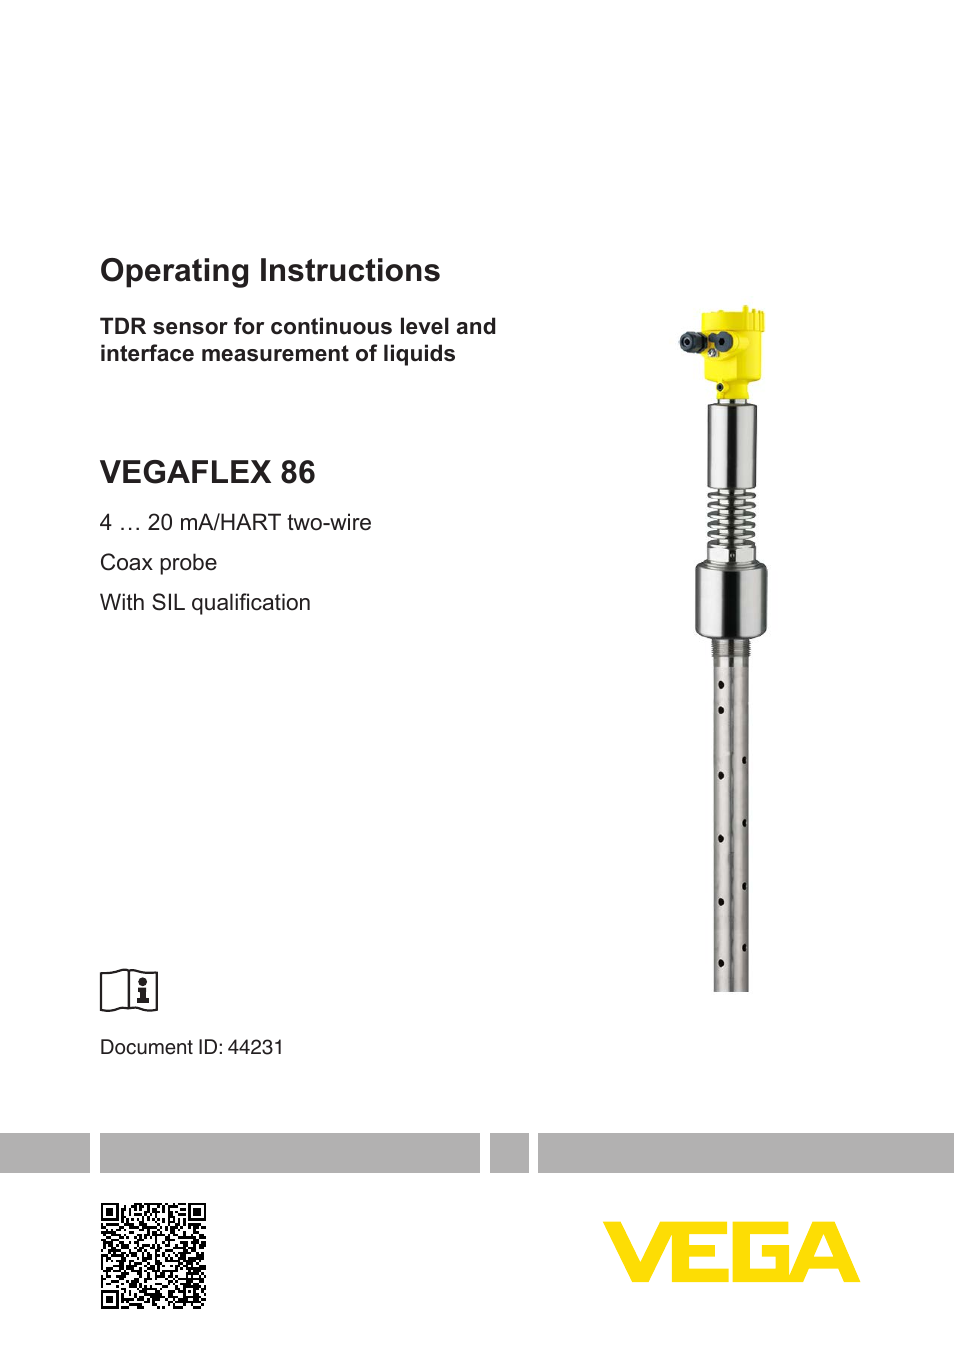 VEGAFLEX 86 4 … 20 mA_HART two-wire Coax probe With SIL qualification